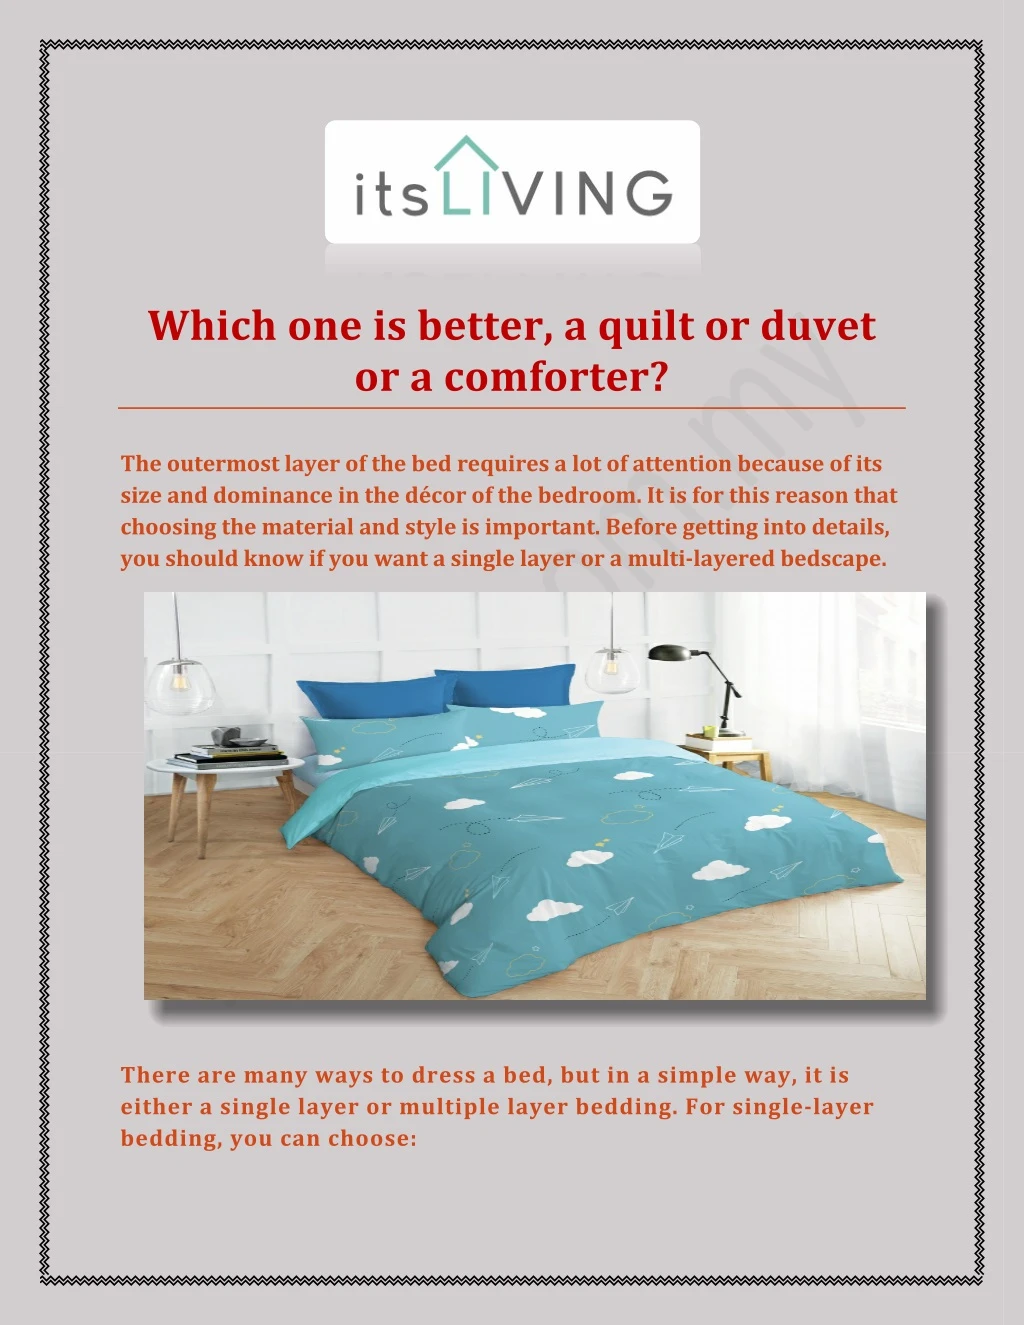 which one is better a quilt or duvet